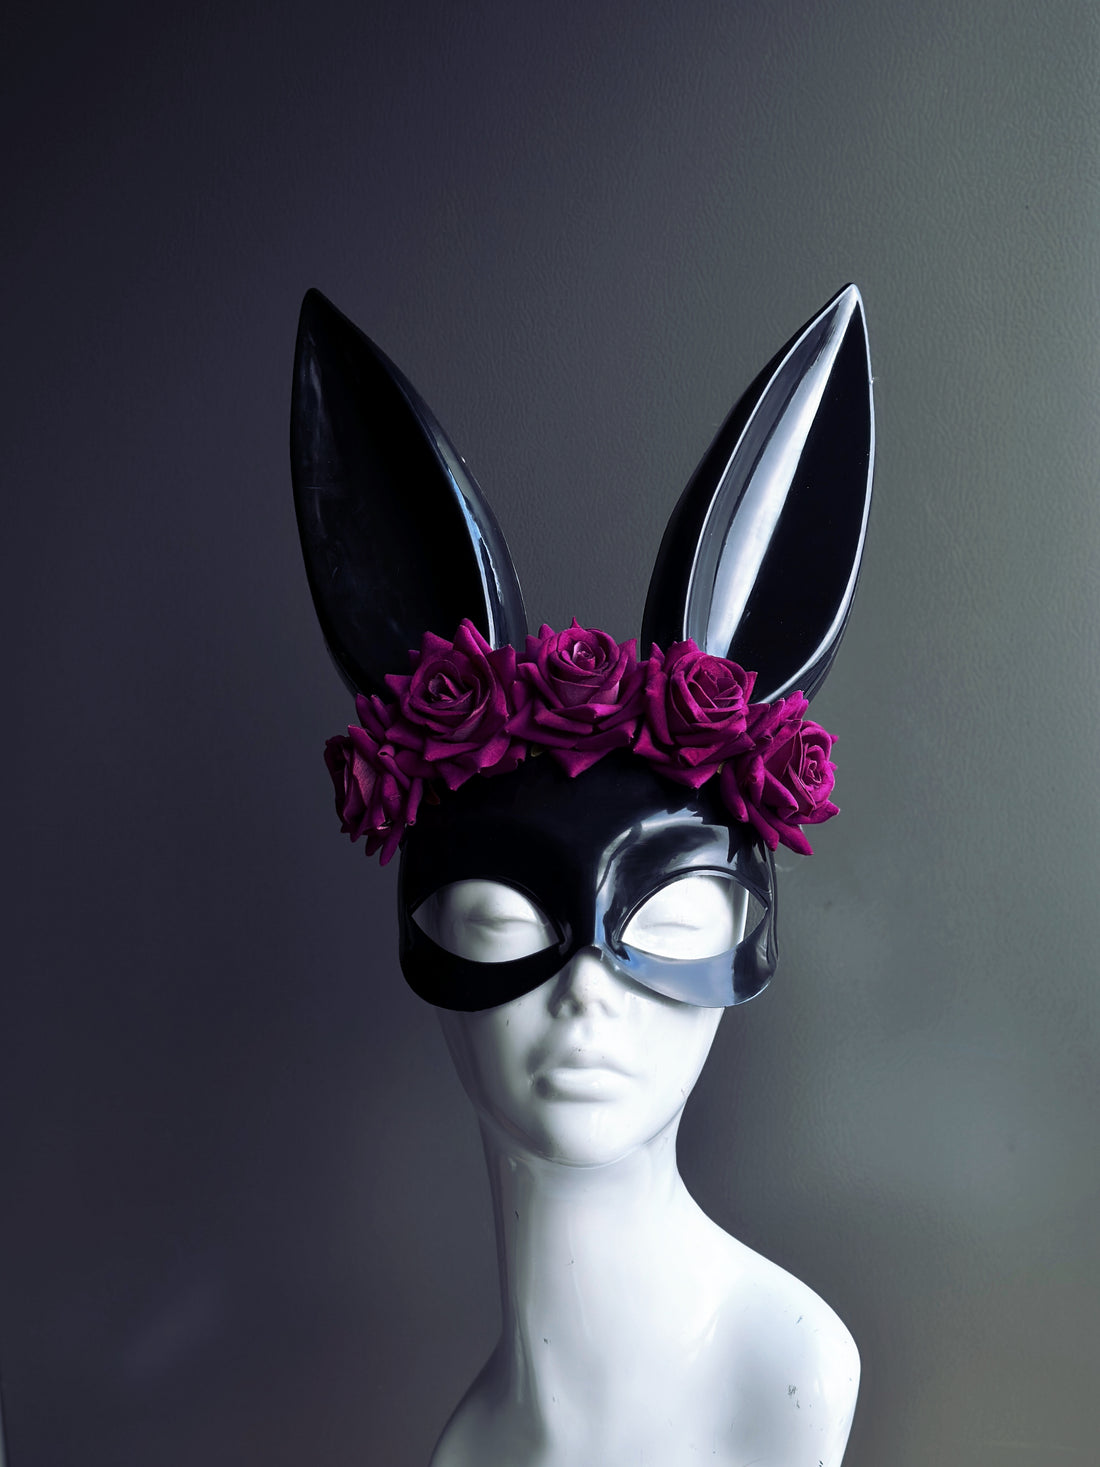 Womens black bunny masquerade mask with purple roses for sale.